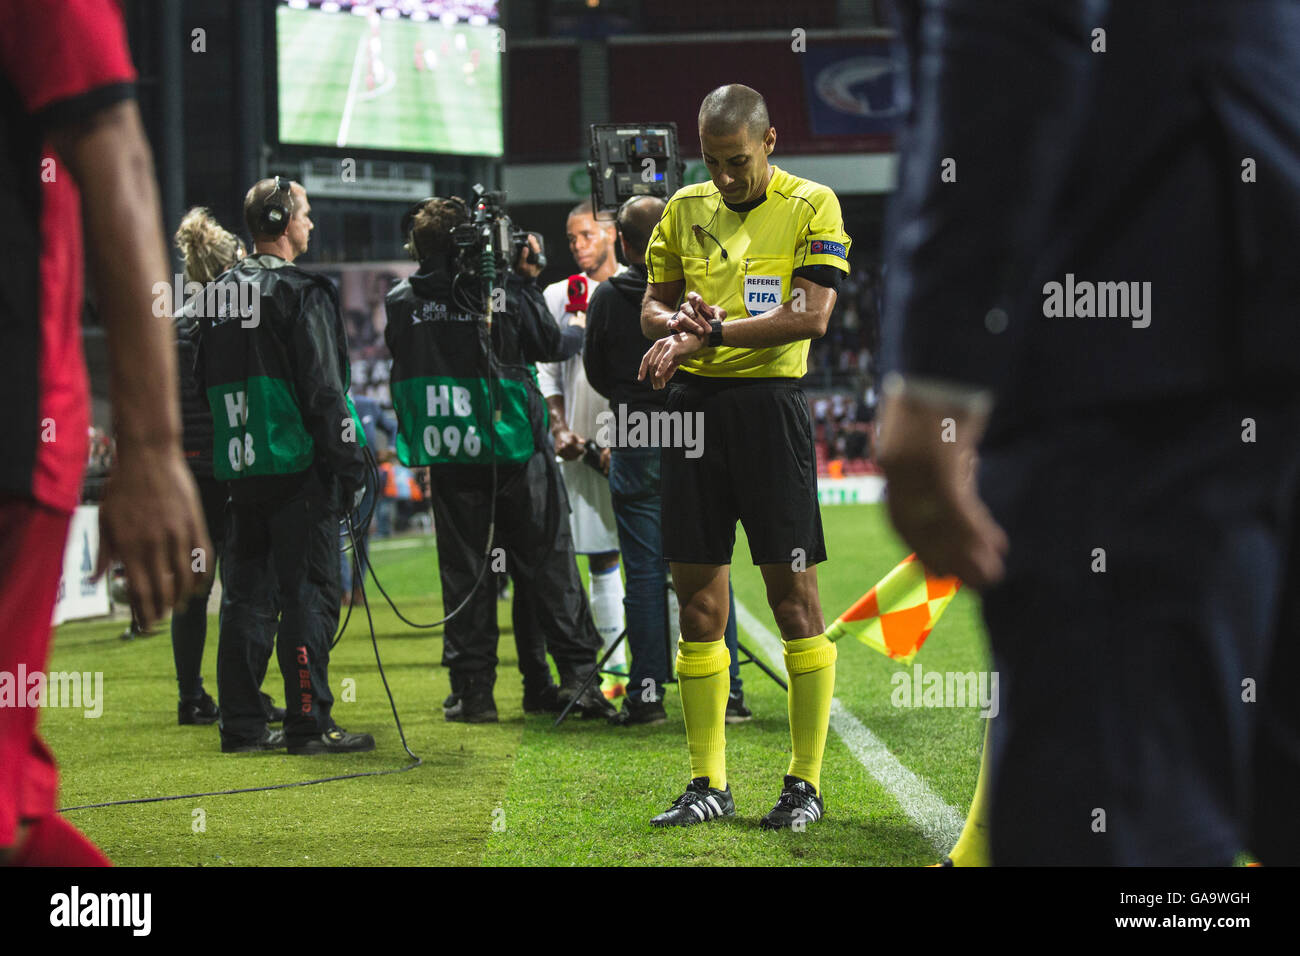 Copenhagen, Denmark. August 3rd 2016. Referee Liran Liany (ISR) during the UEFA Champions League qualification match between FC Copenhagen and FC Astra Giurgiu at Telia Parken. FC Copenhagen won the match 3-0 and a through to the play-off round. © Samy Khabthani/Alamy Live News Stock Photo